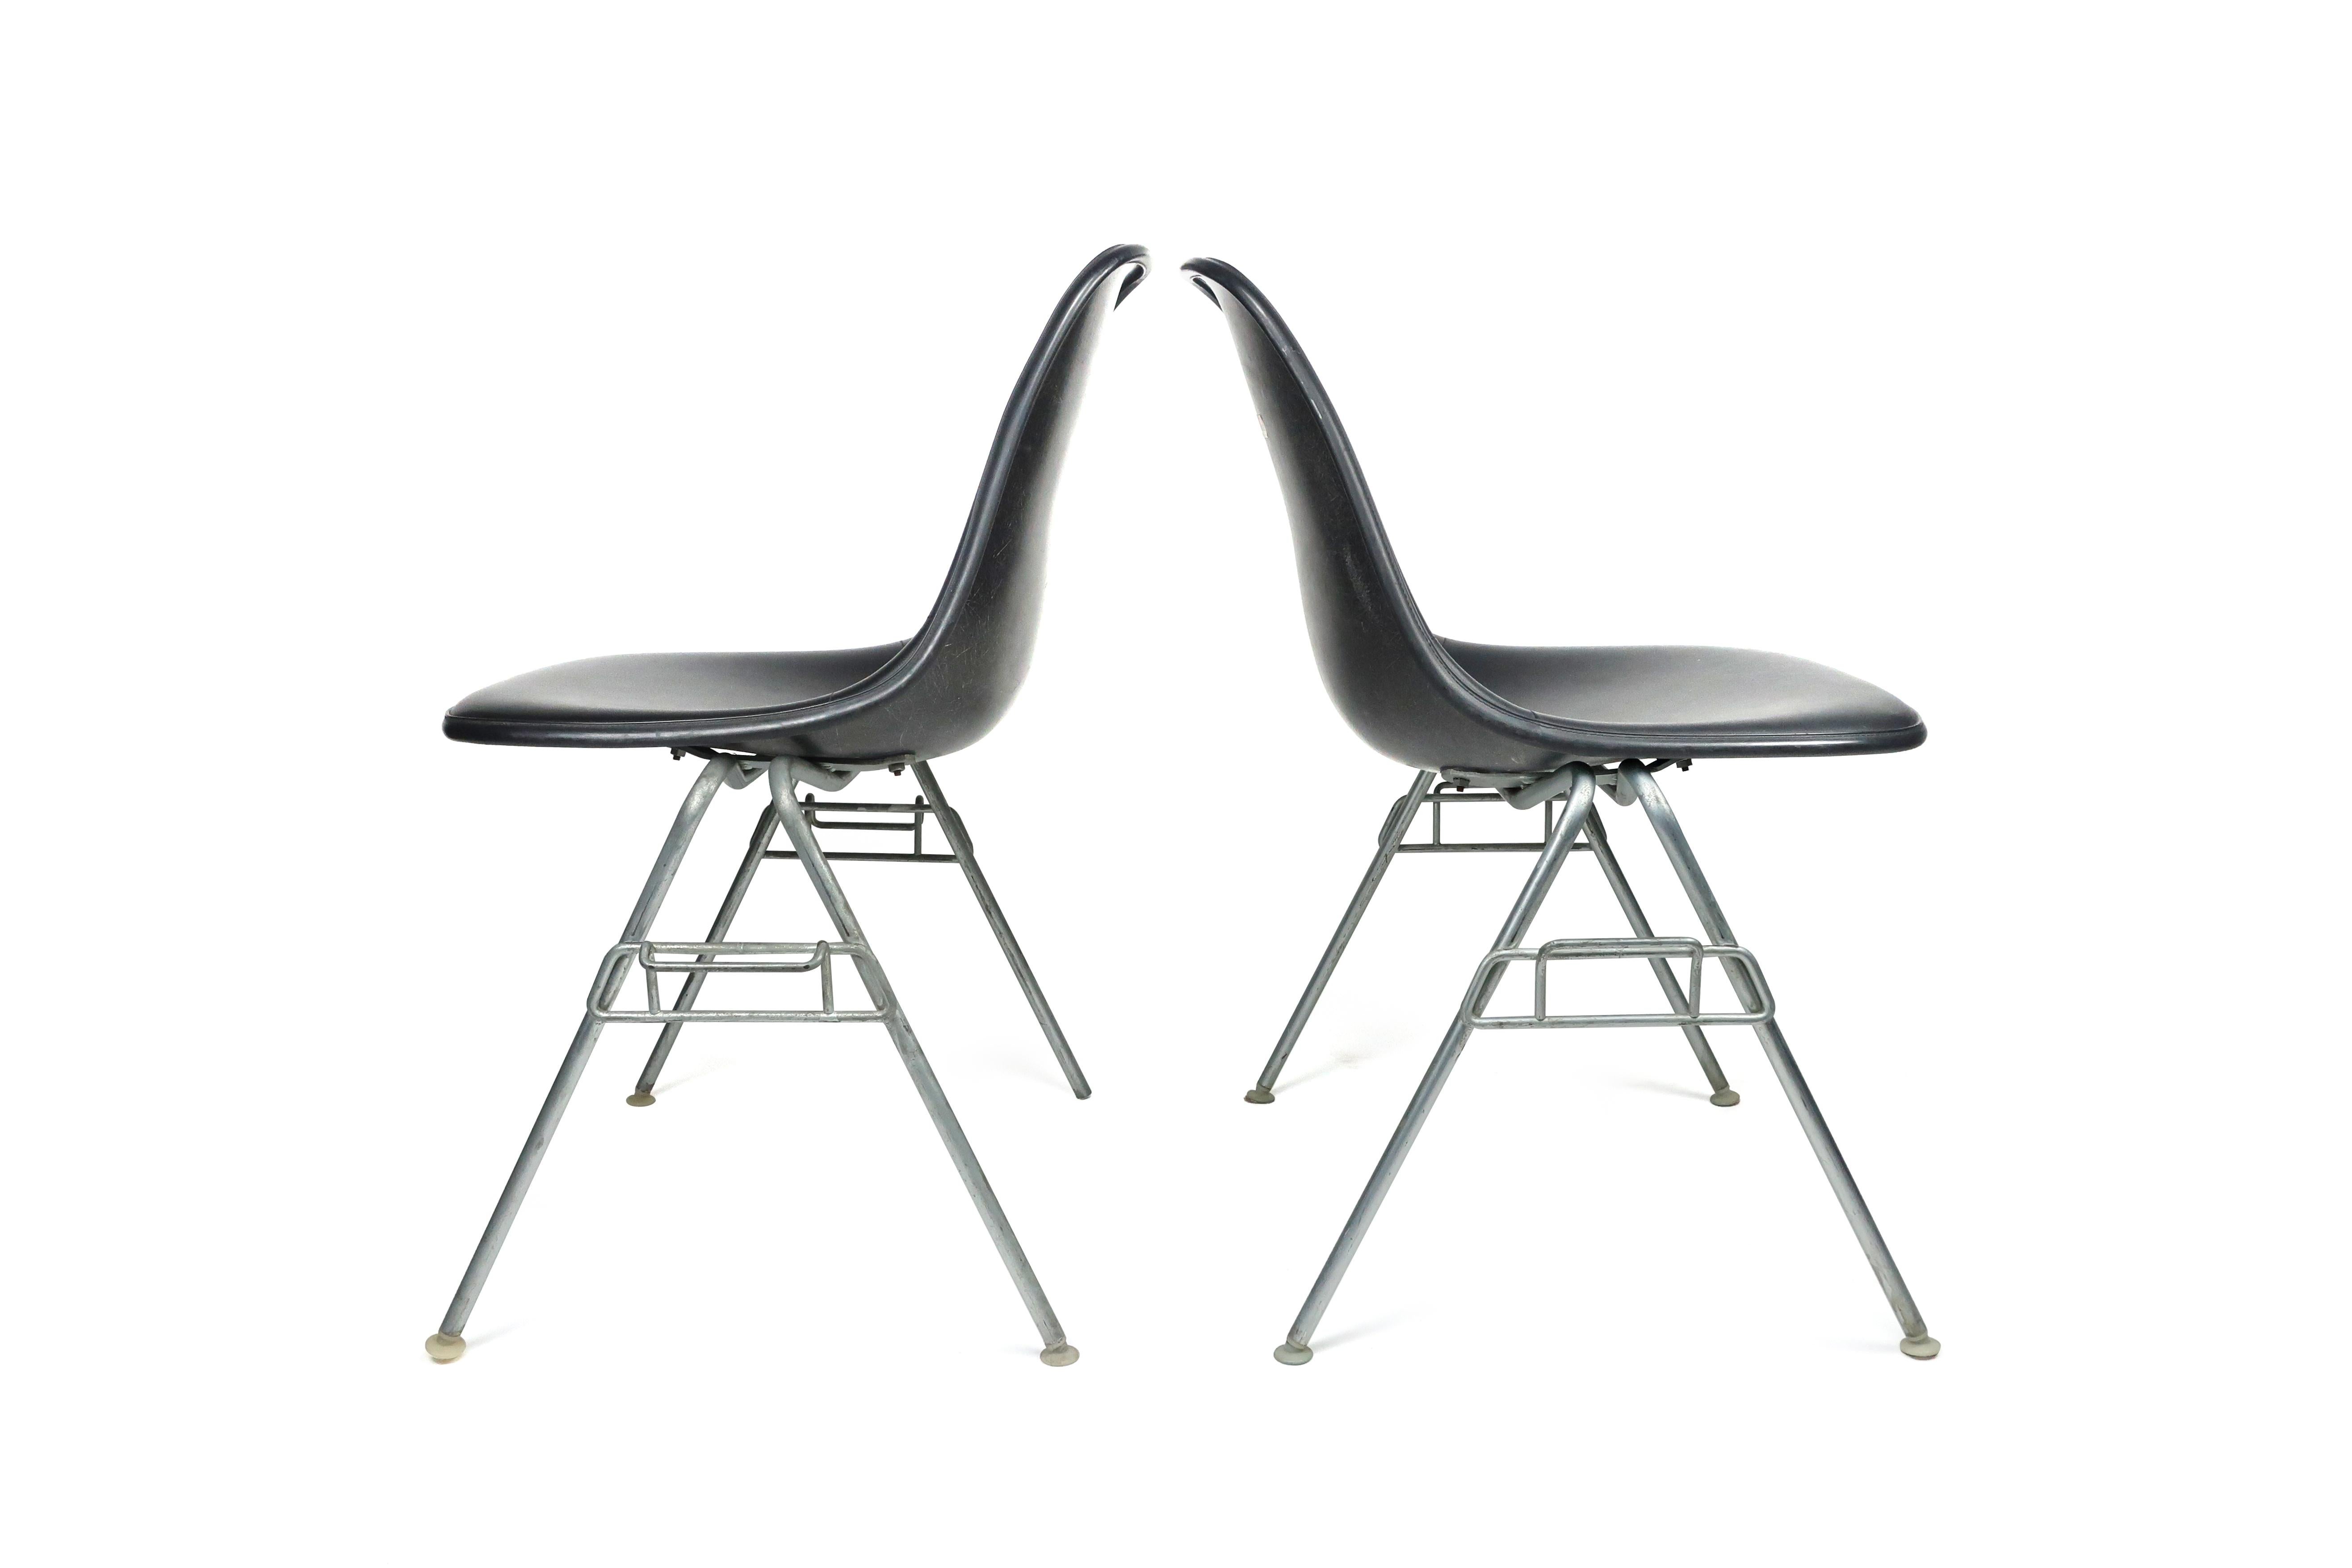 Ray & Charles Eames created the Stacking side chair (DSS) in response to demands for a lightweight, stacking chair that could be set up quickly for seating large groups and, at the same time, be stored easily.
The chairs can be arranged in straight